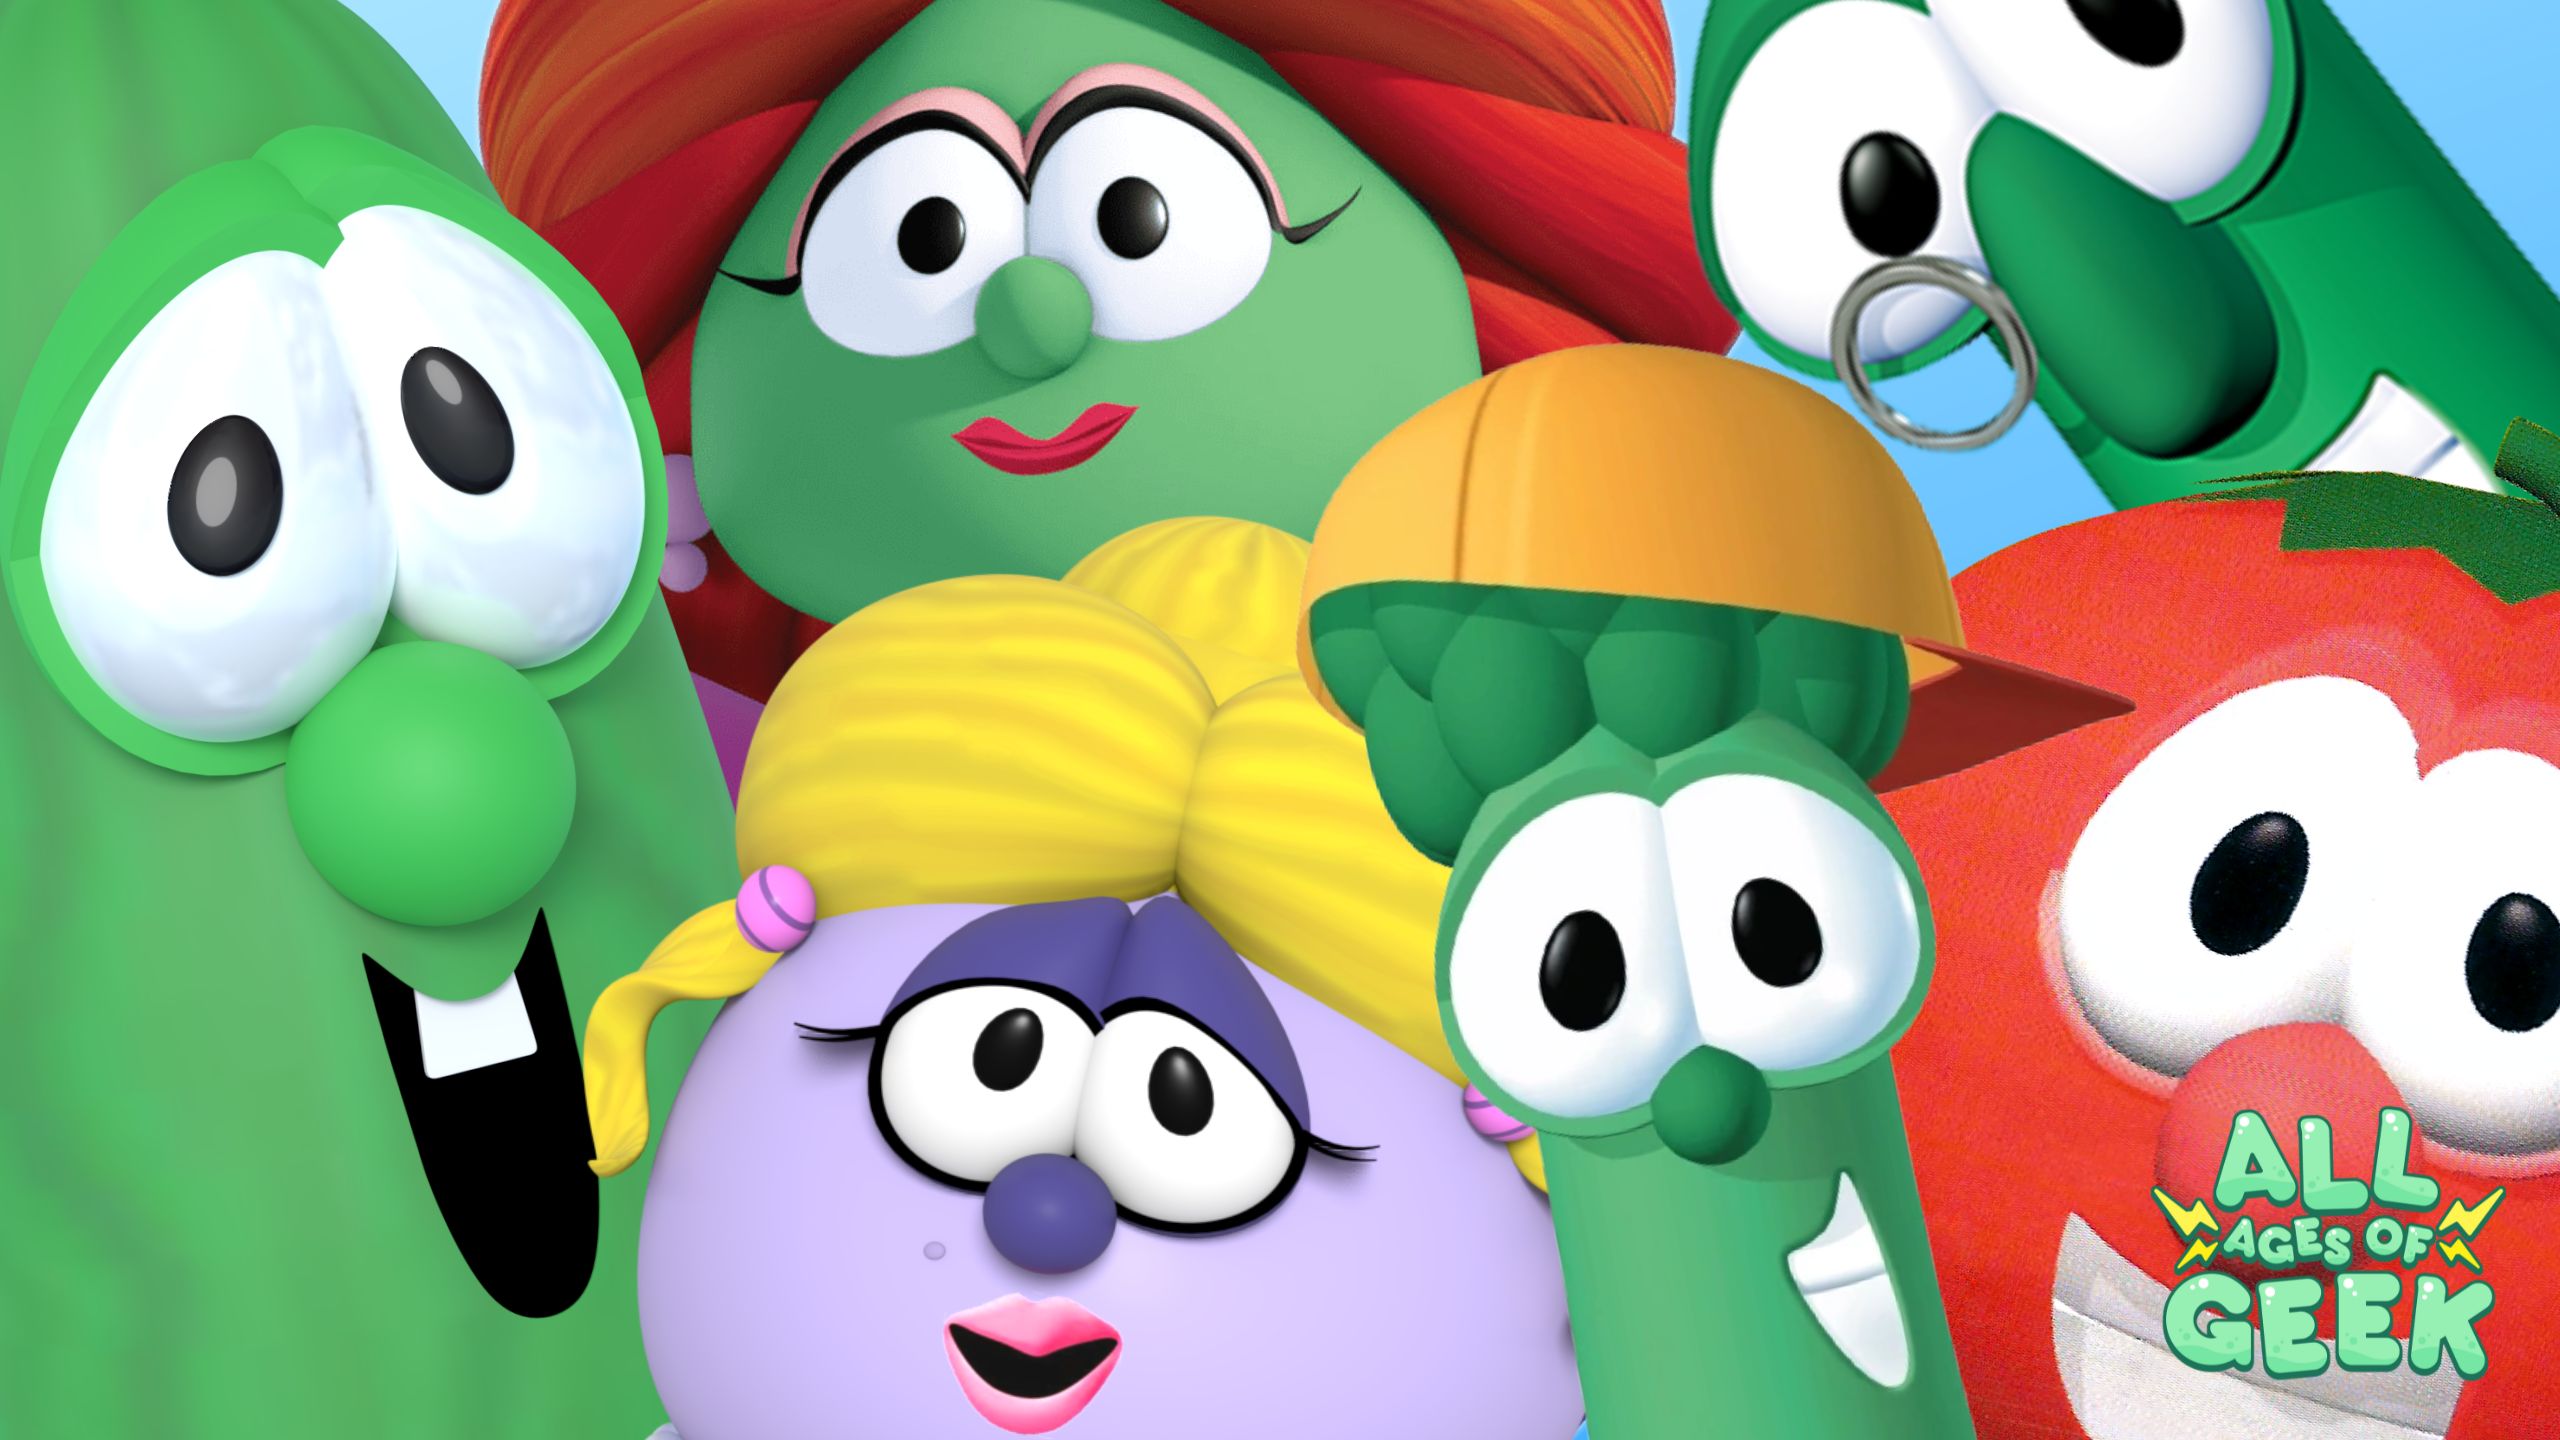 VeggieTales Characters and what you can learn from them